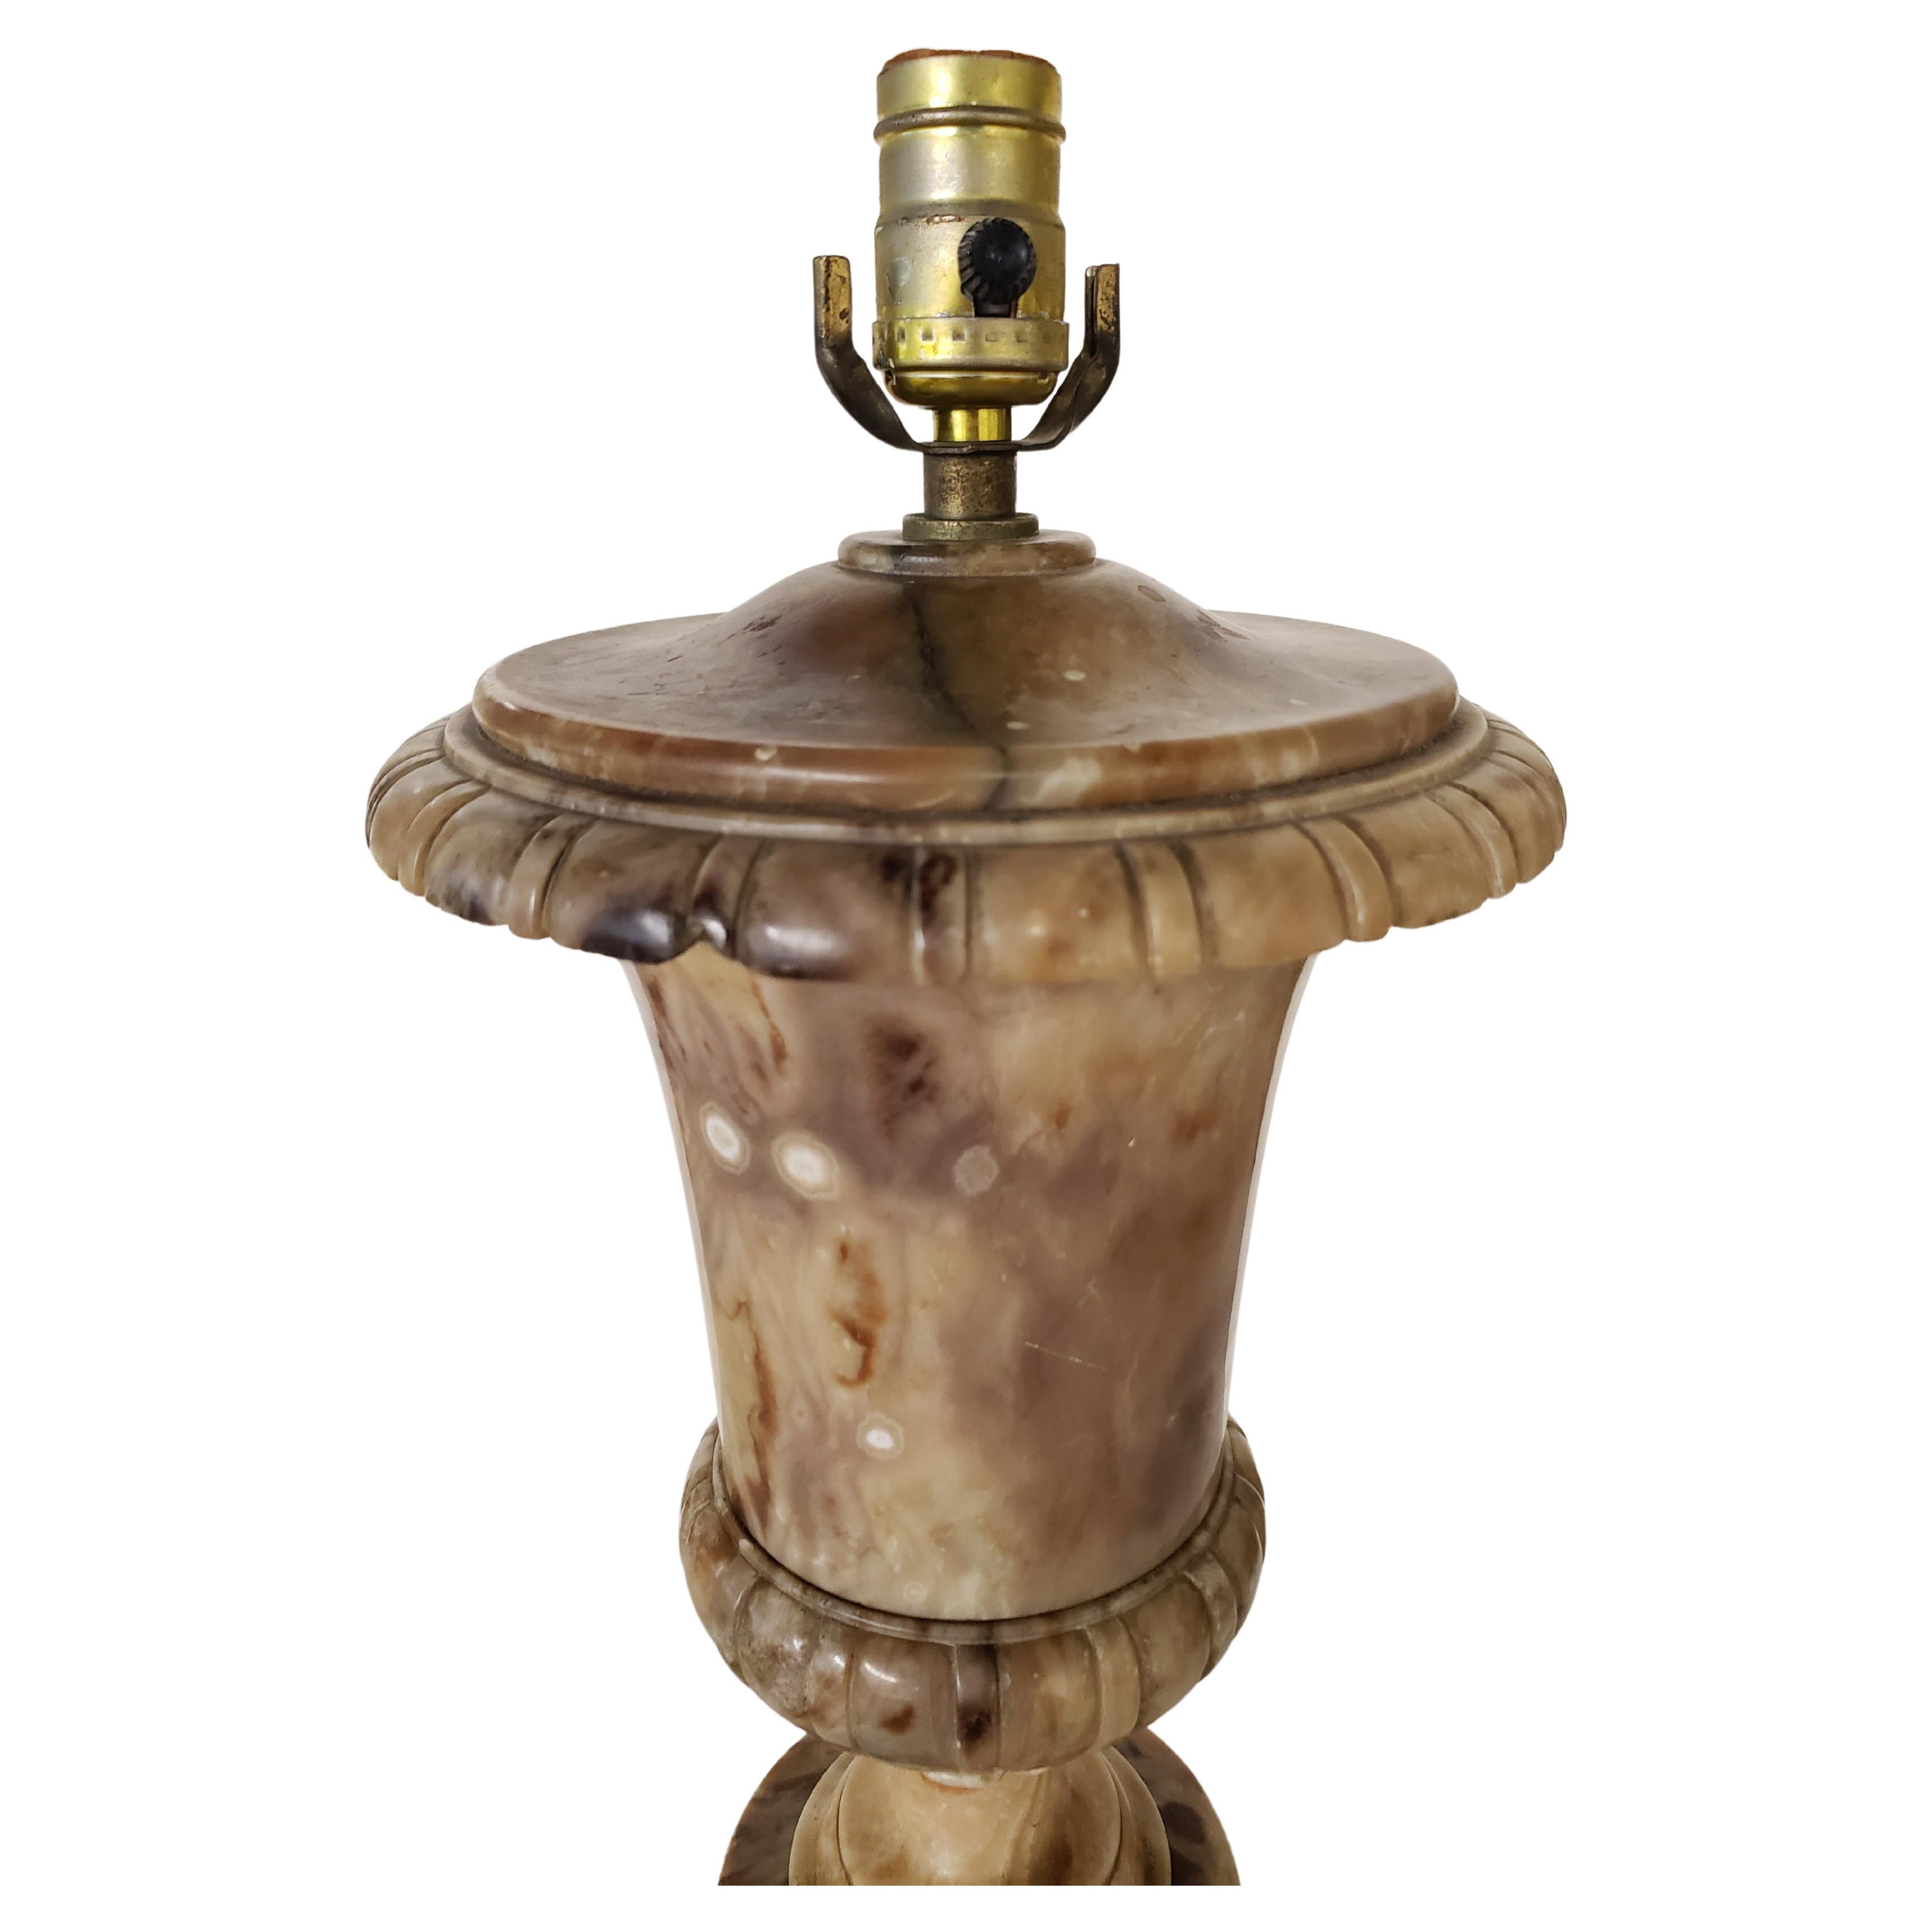 Mid century brown Alabaster Urn table lamp from the 60s. Good vintage condition. Measures 9 inches in diameter and stands 21.5 inches tall to the top of the socket. Lamp is 6 inches in diameter at the base.